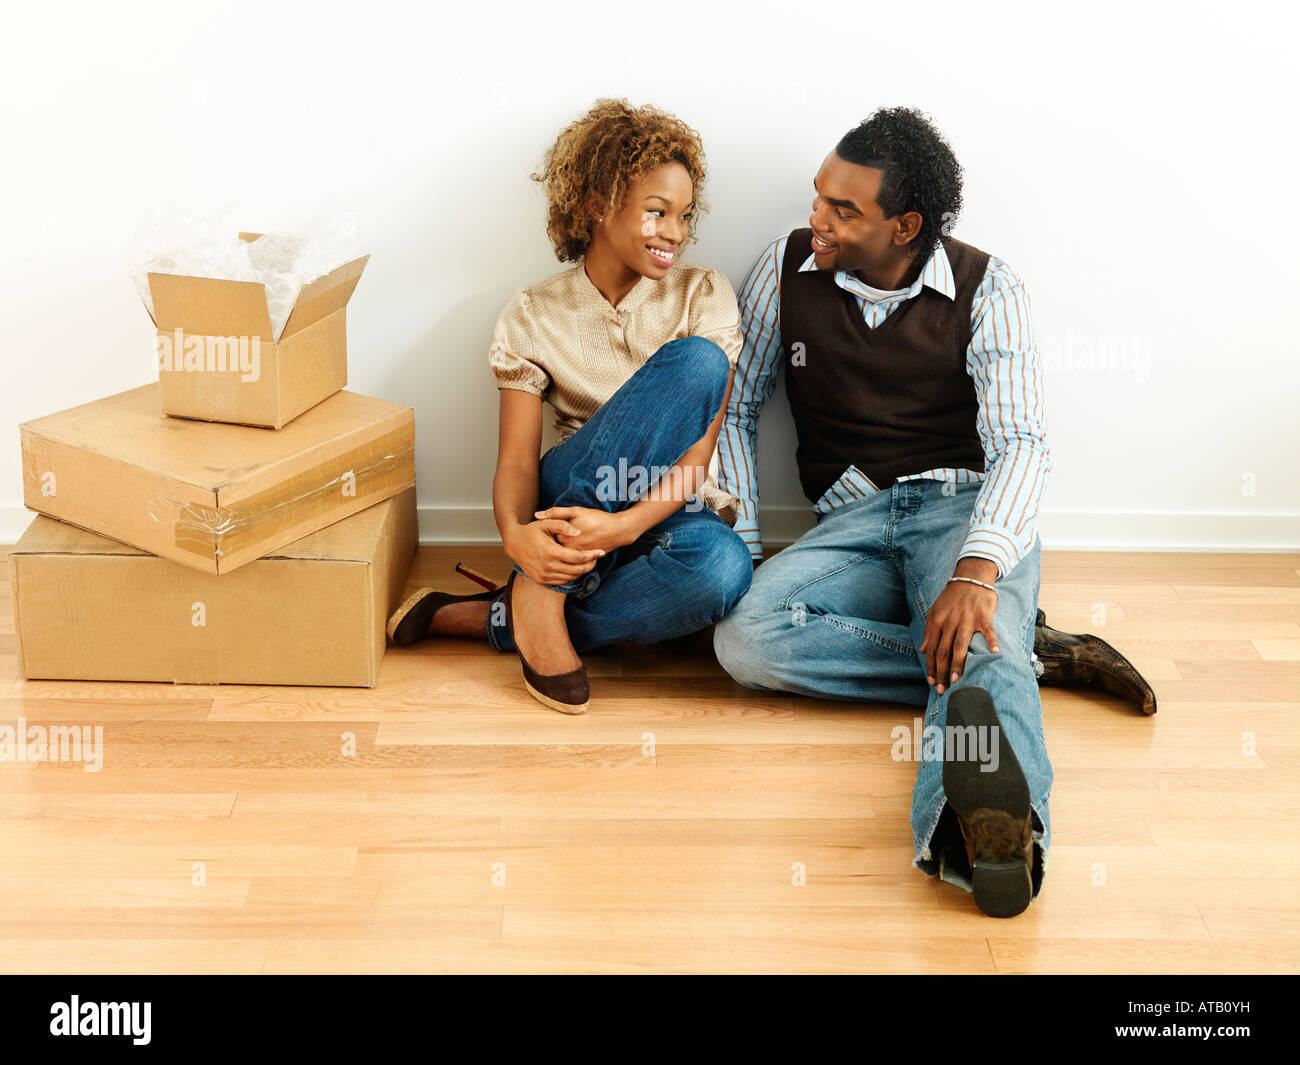 Portrait of smiling happy young couple sitting on floor of home with moving boxes Stock Photo